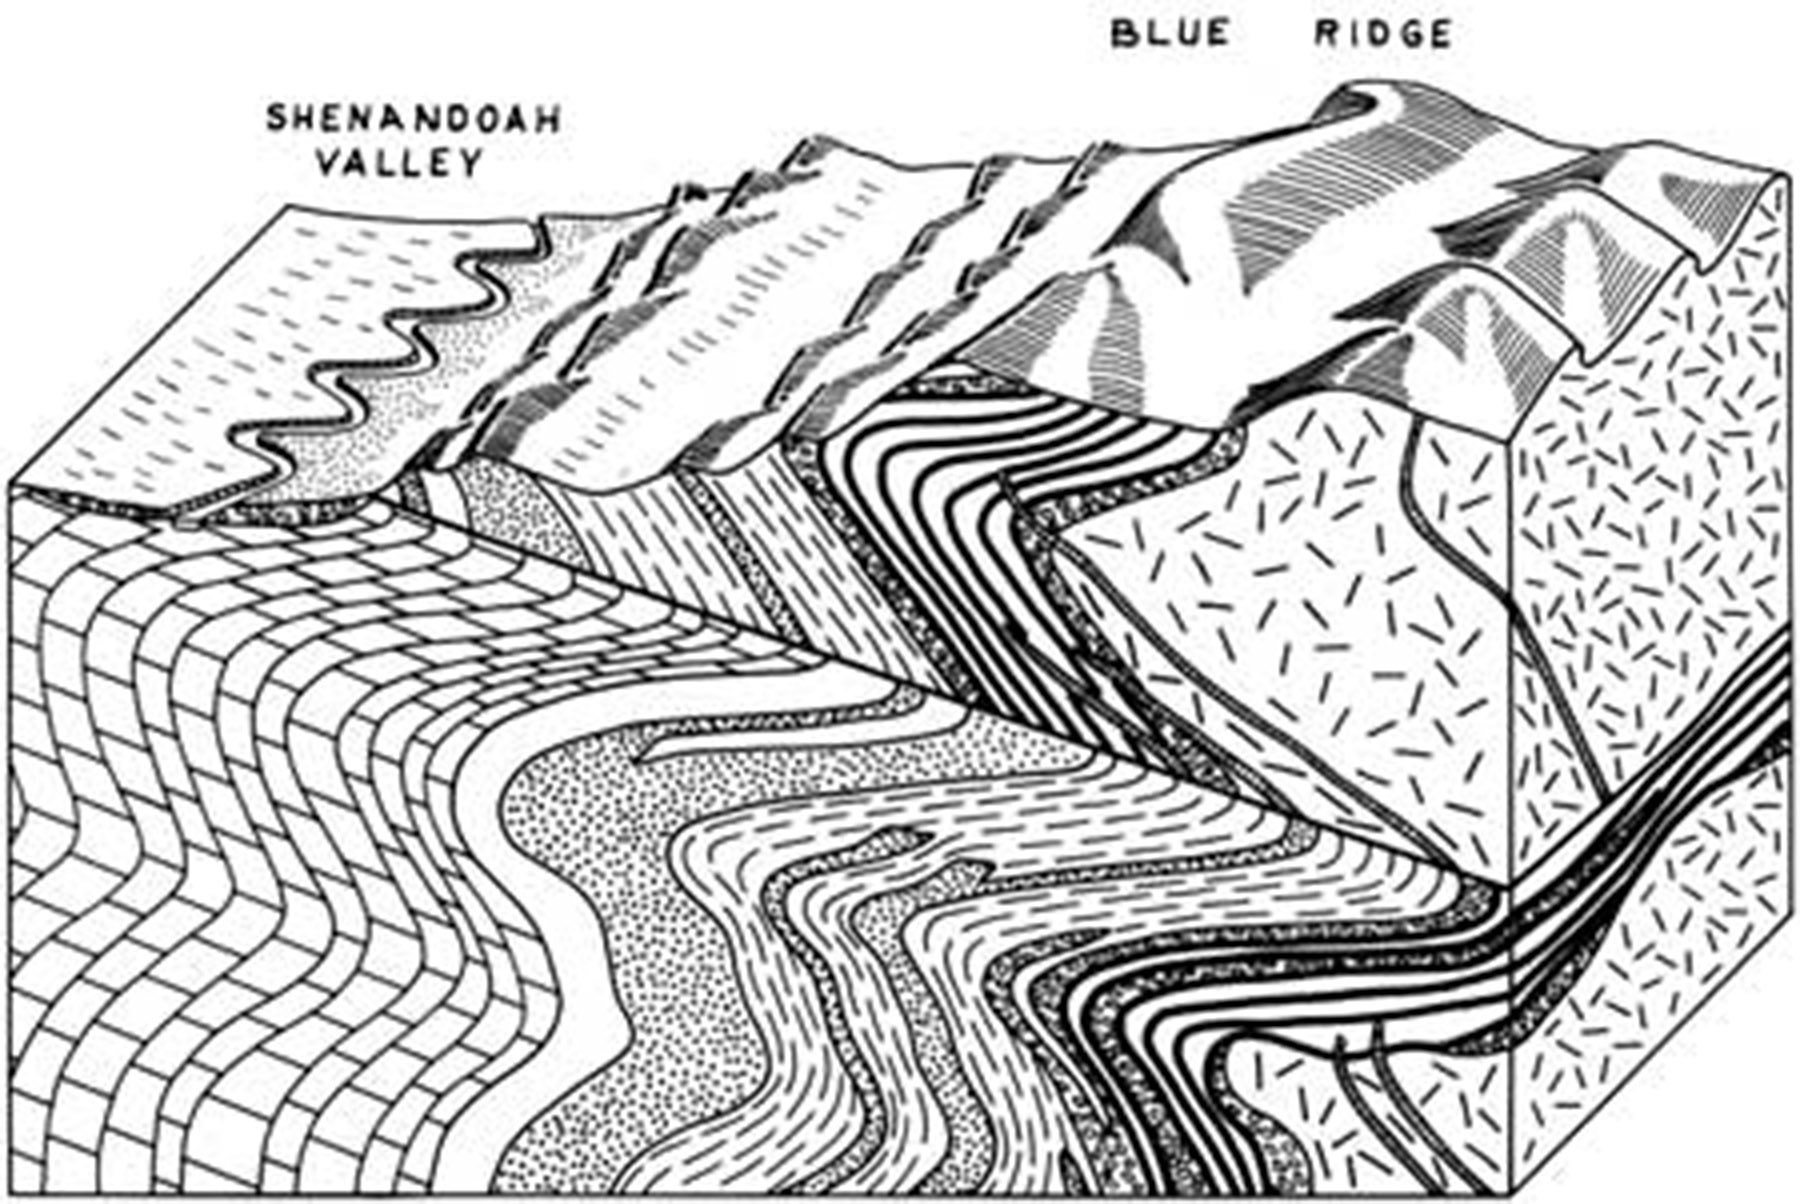 Figure 37:  As the Iapetus Ocean closed from 450 to 300 Ma, enormous diastrophic forces came to bear in the region of Shenandoah National Park resulting in compression, extension and shearing forces that result in folding, faulting, and warping of strata with metamorphism within deeper layers.  Weaker forces occurred during the Taconic (500-440 Ma) and Acadian (375-325 Ma) orogenies when island arcs collided with ancient North America (Laurentia).  The Alleghanian orogeny (320-250 Ma) had a much more profound effect as Gondwana (ancient Africa) and Laurentia (ancient North America) collided giving rise to the supercontinent Pangea and the Appalacian mountains which were as high as the current Himalayas.  Diastrophic forces resulted in strata being force from the East to the West as an overturned thrust fault.  Weathering and erosion have worn down the strata to what is currently seen.